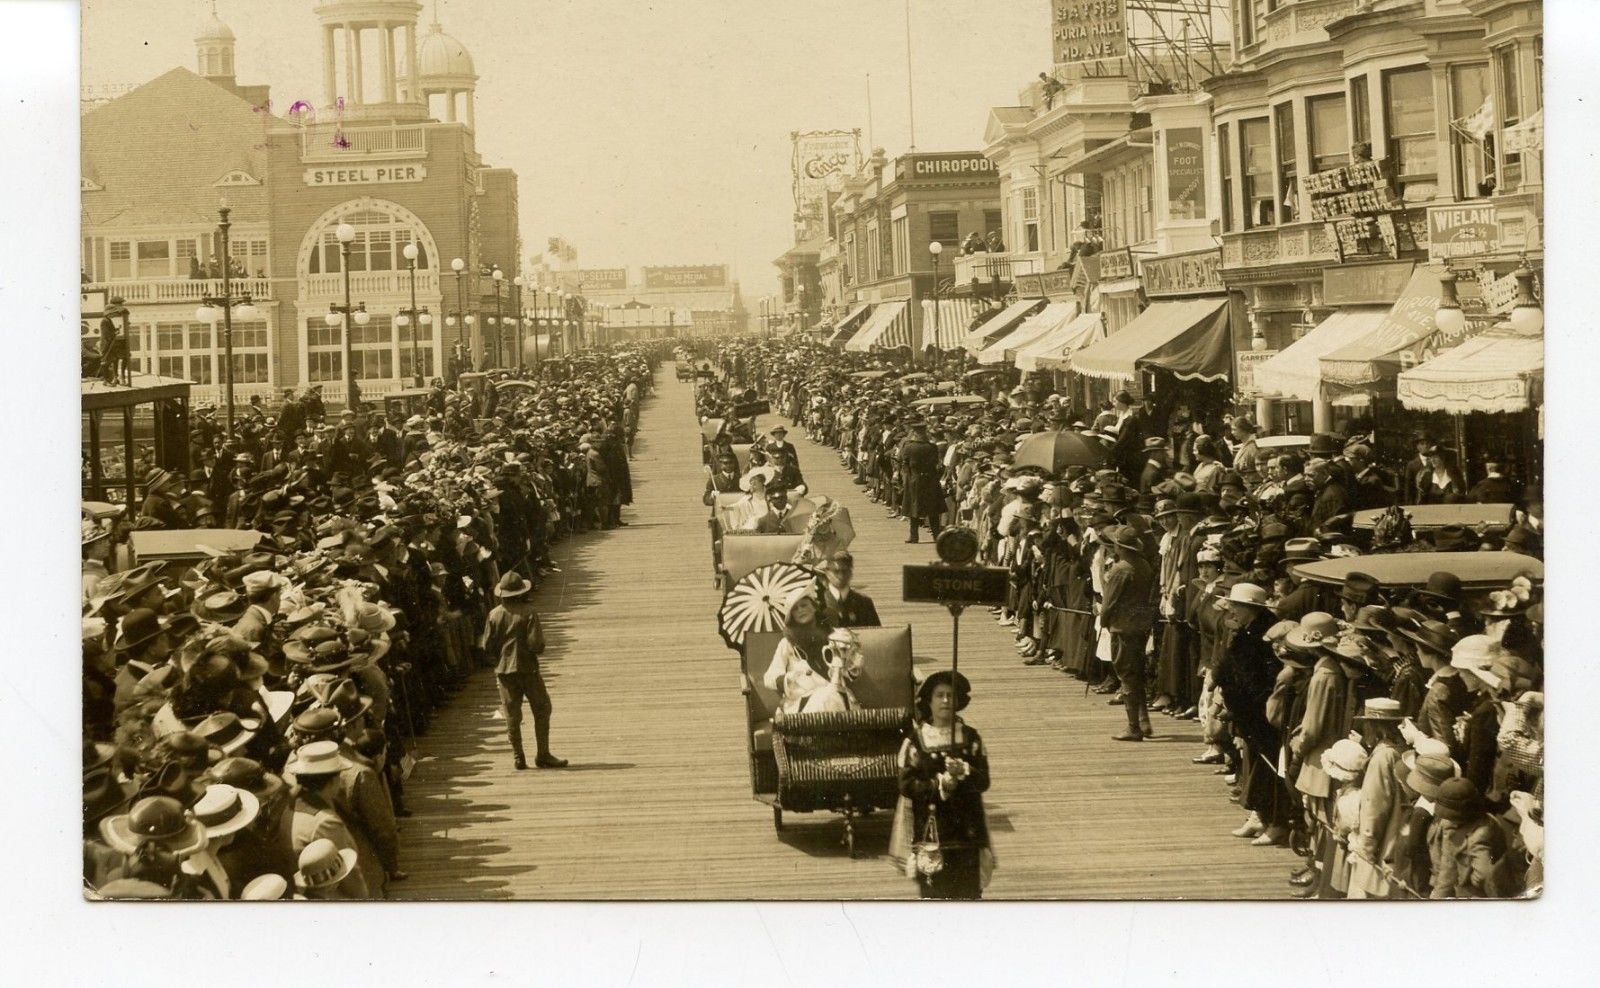 Atlantic City - Parade probably the Easter Parade - c 1905